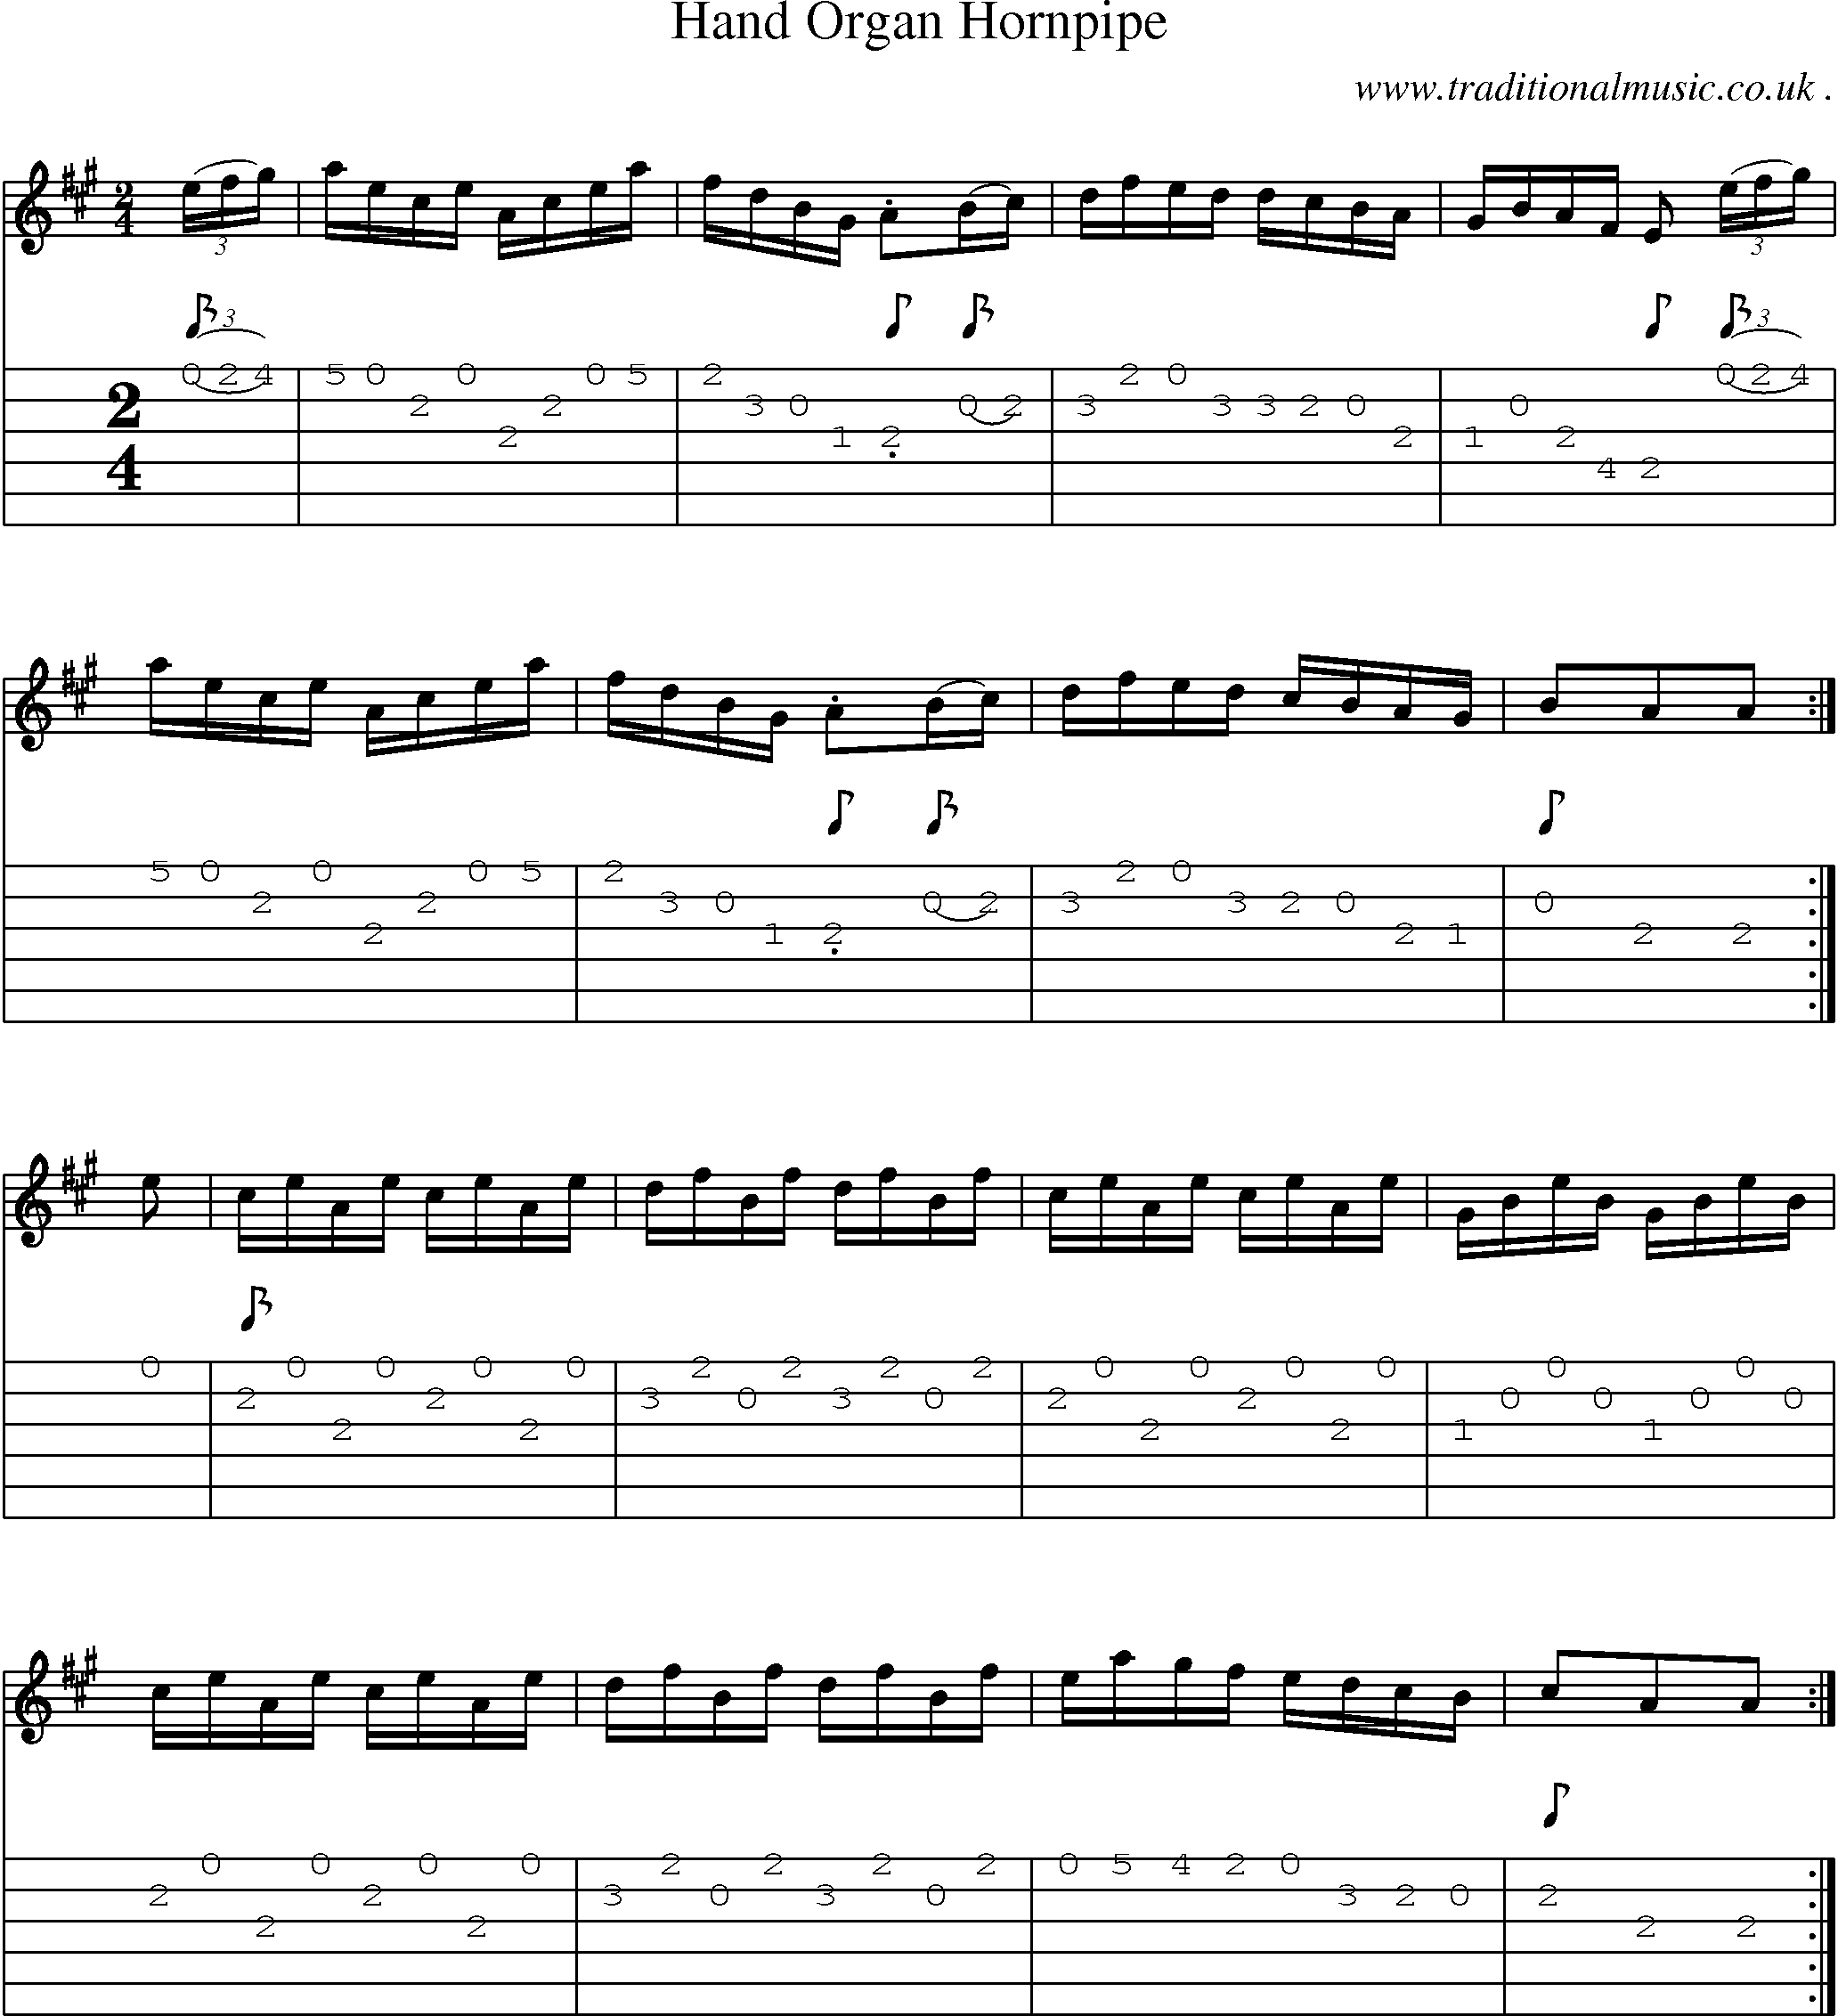 Sheet-Music and Guitar Tabs for Hand Organ Hornpipe